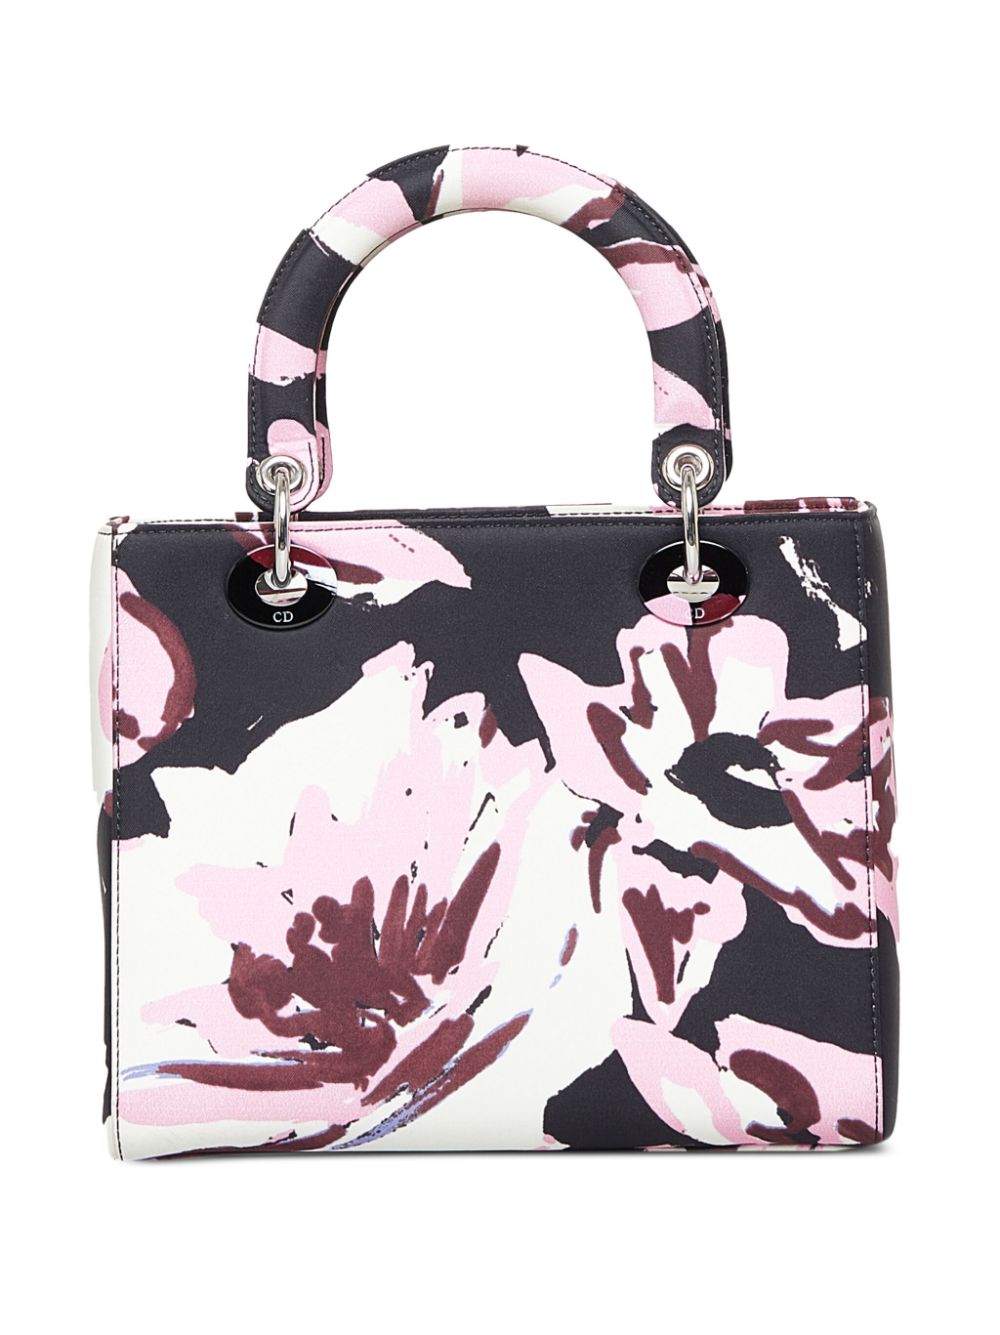 Christian Dior Pre-Owned Bags for Women - Shop on FARFETCH